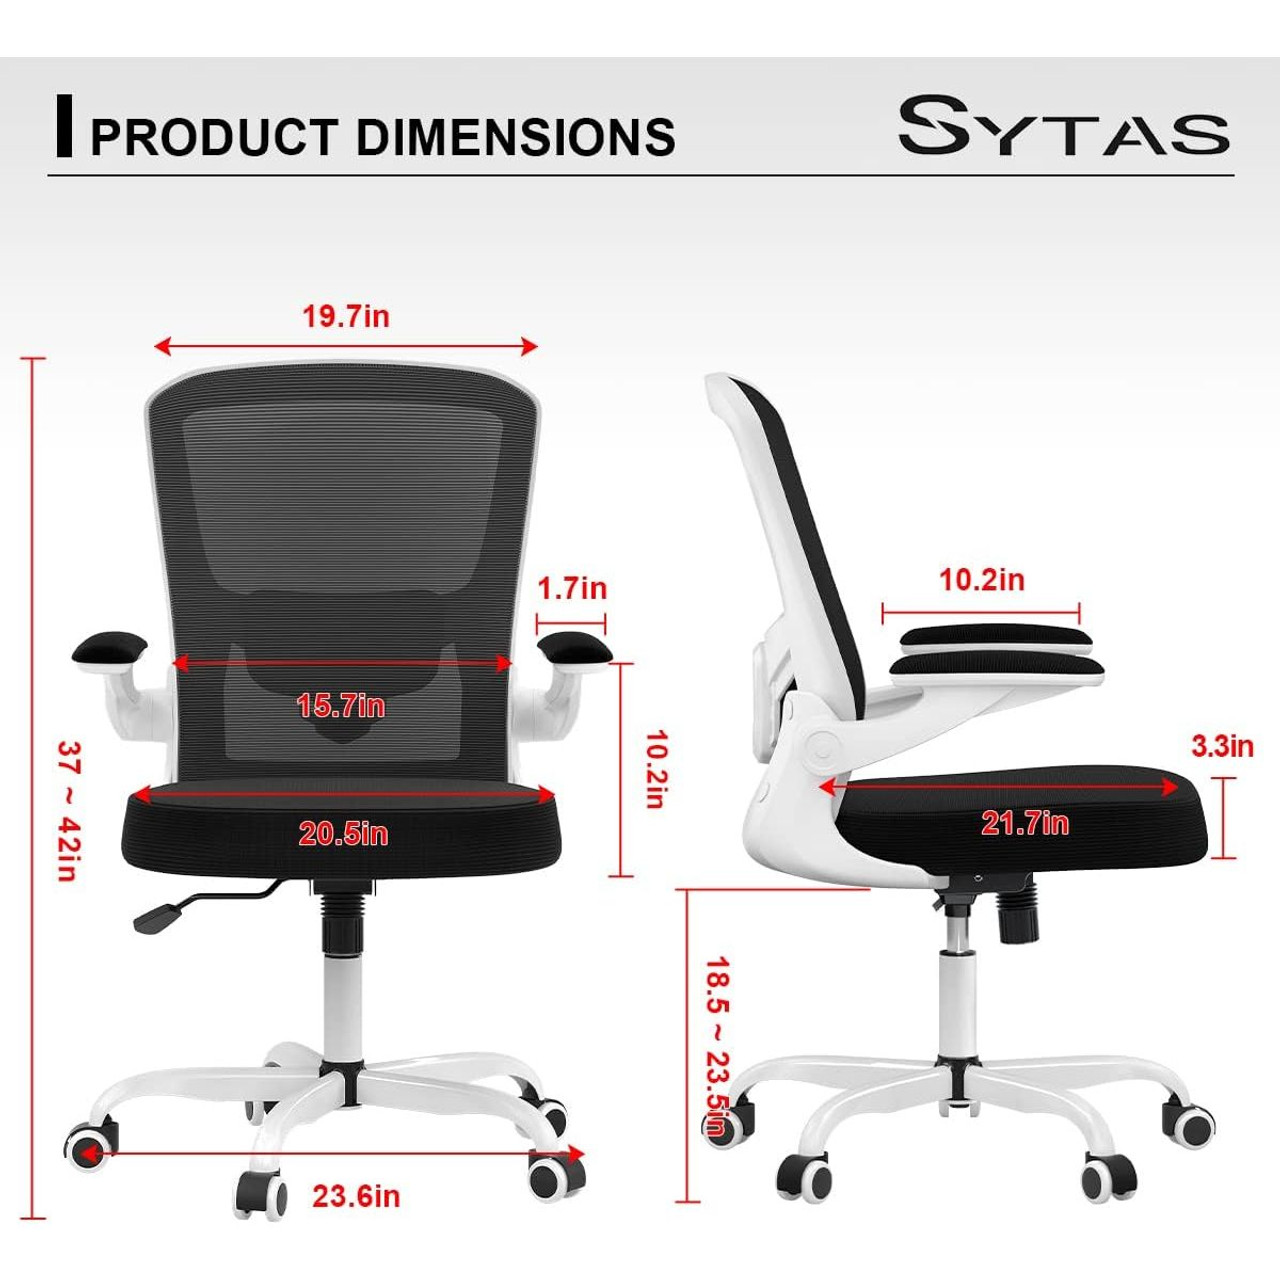 Sytas™ Ergonomic Mesh Office Chair product image